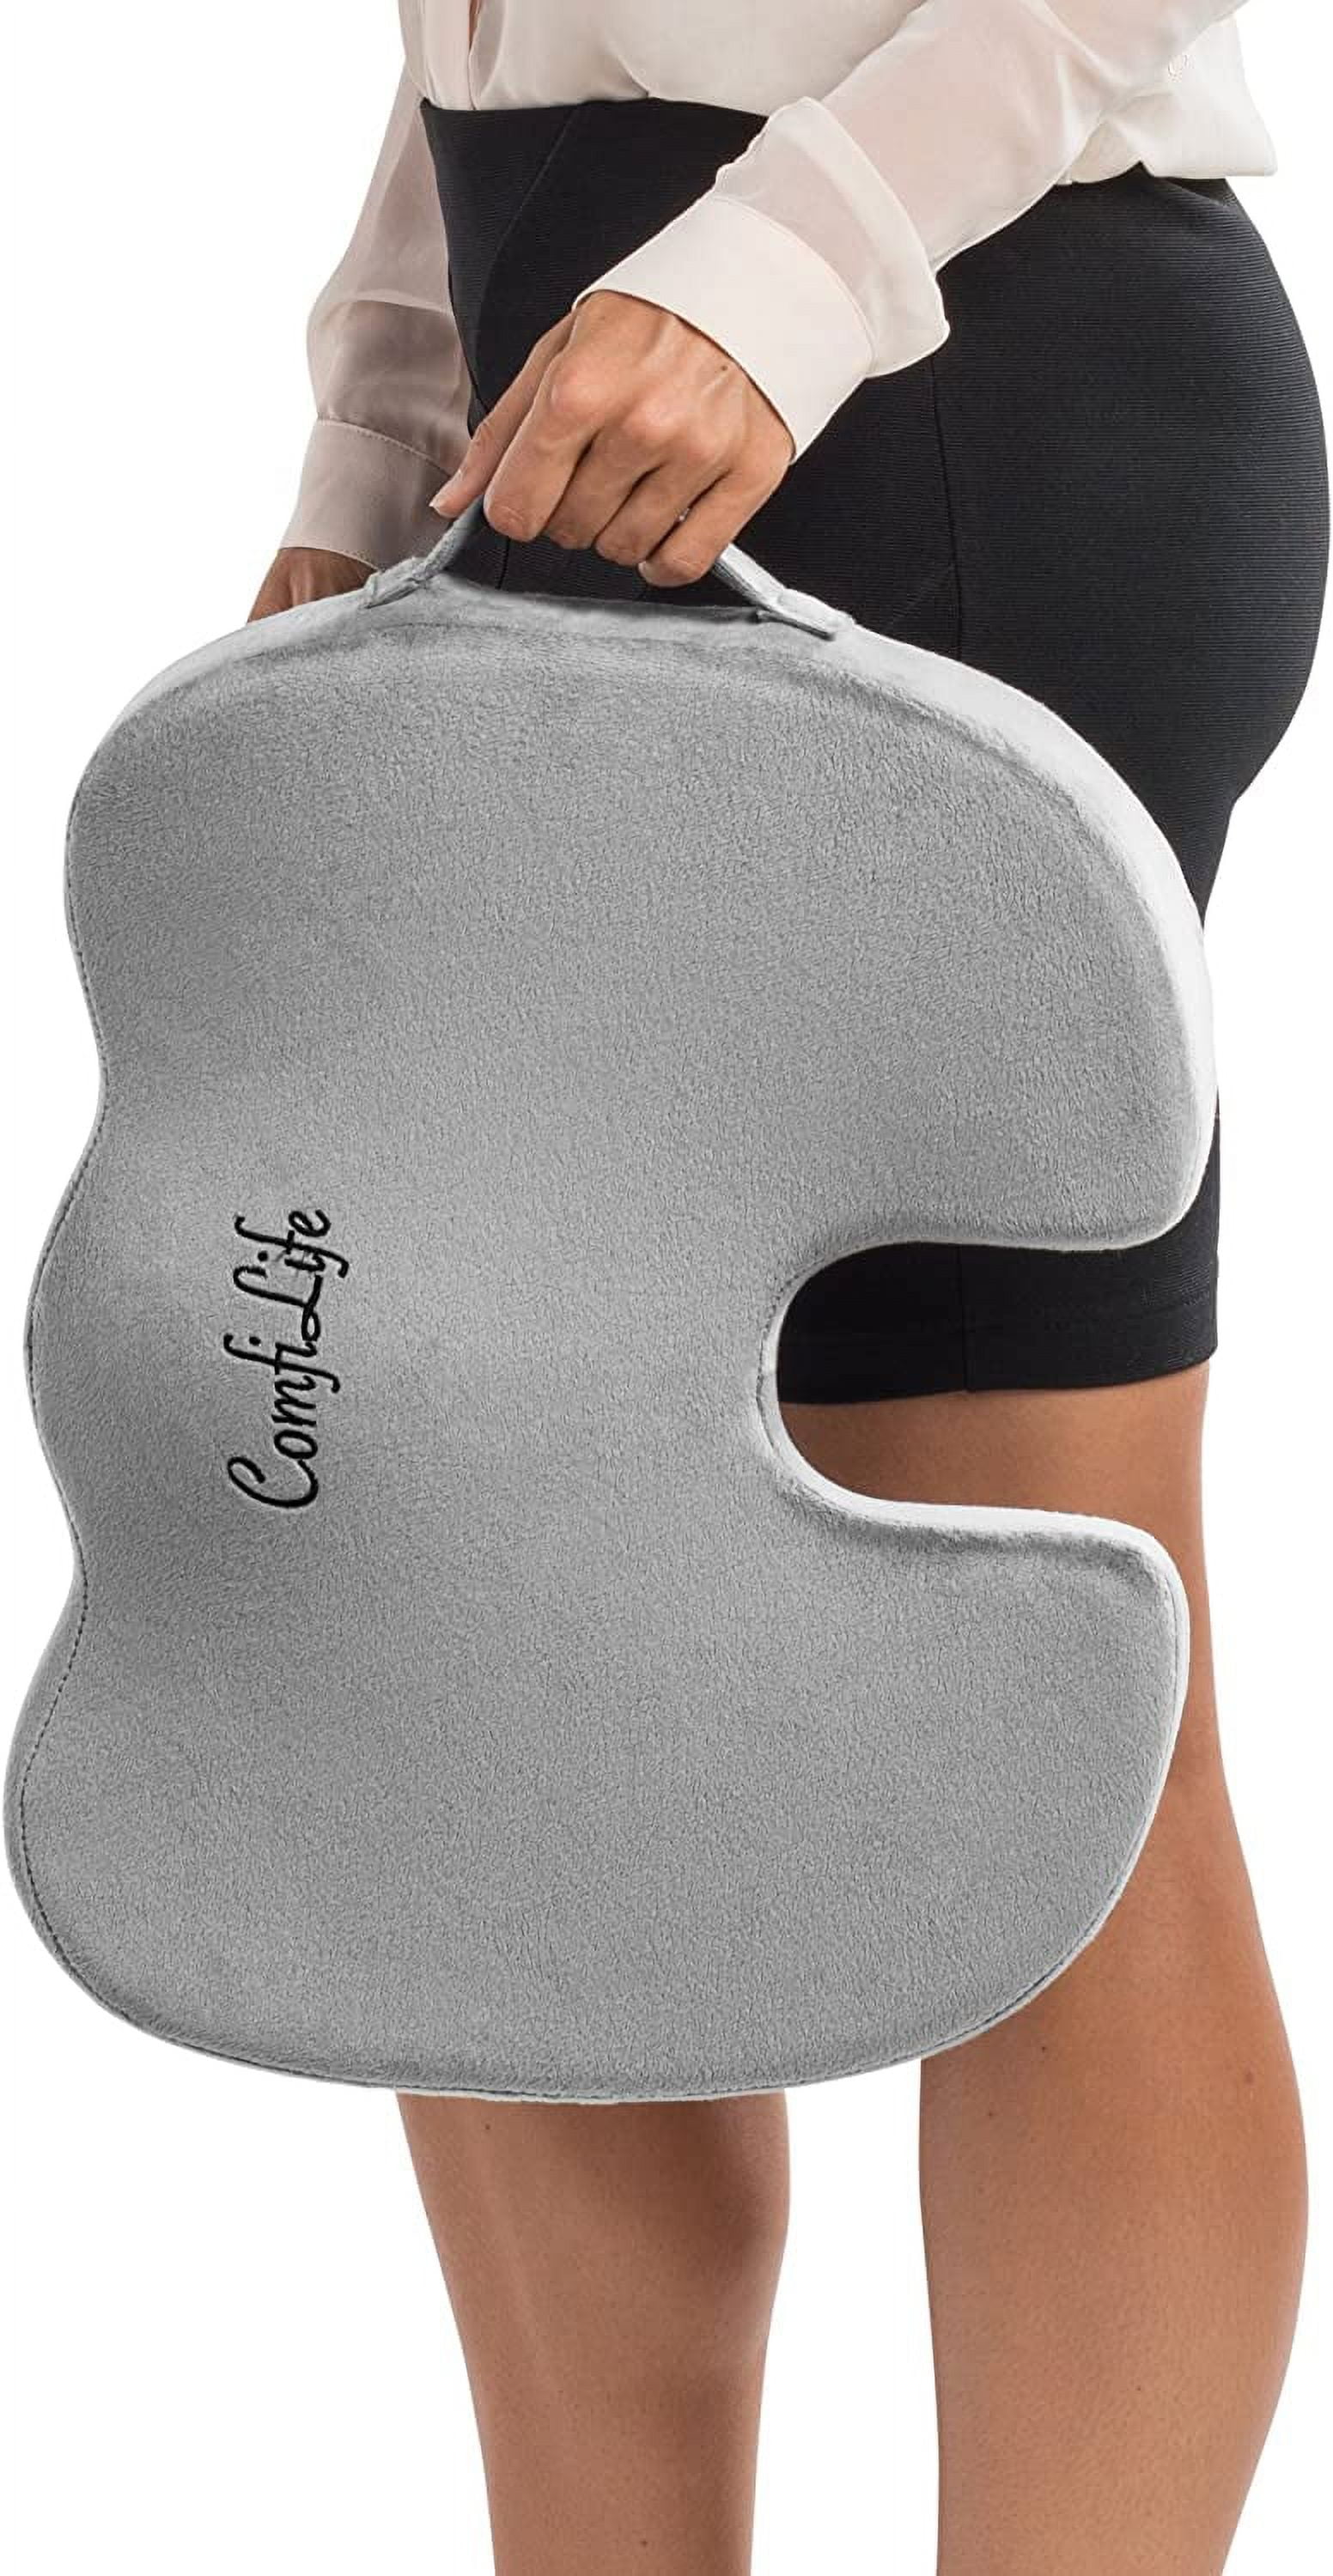 ComfiLife Coccyx Orthopedic Memory Foam Seat Cushion Reviews and Deals